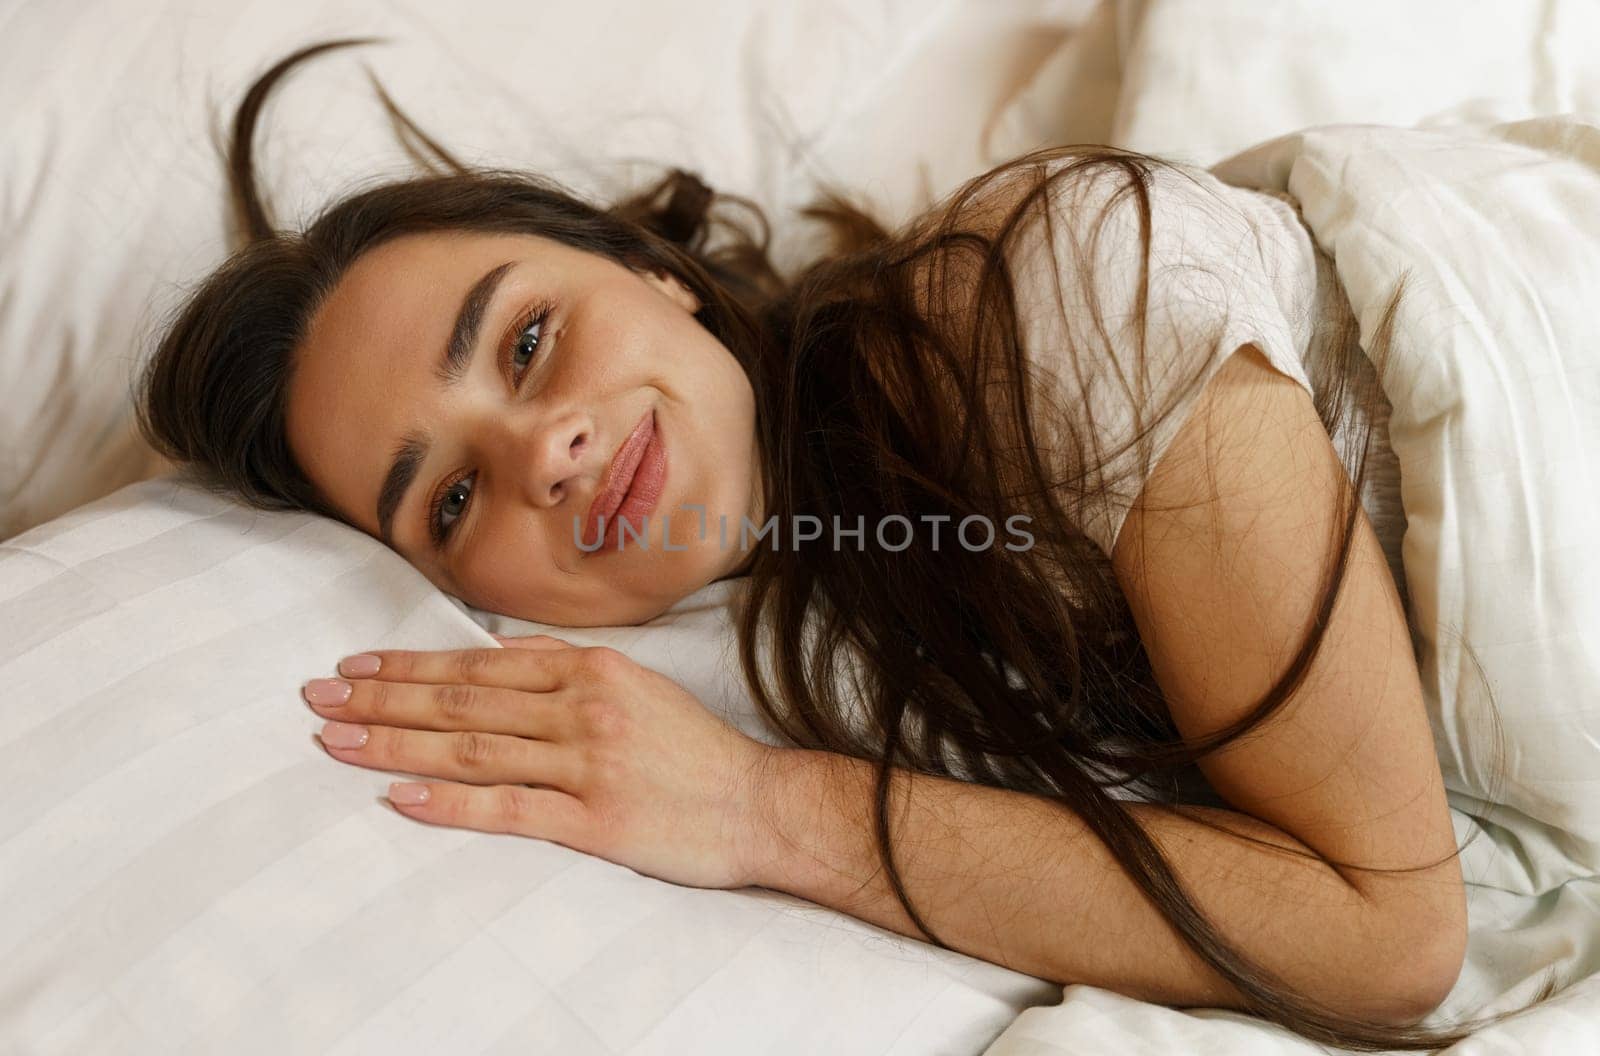 A young woman lying in bed woke up after a dream, flirting, smiling, looking at the camera.